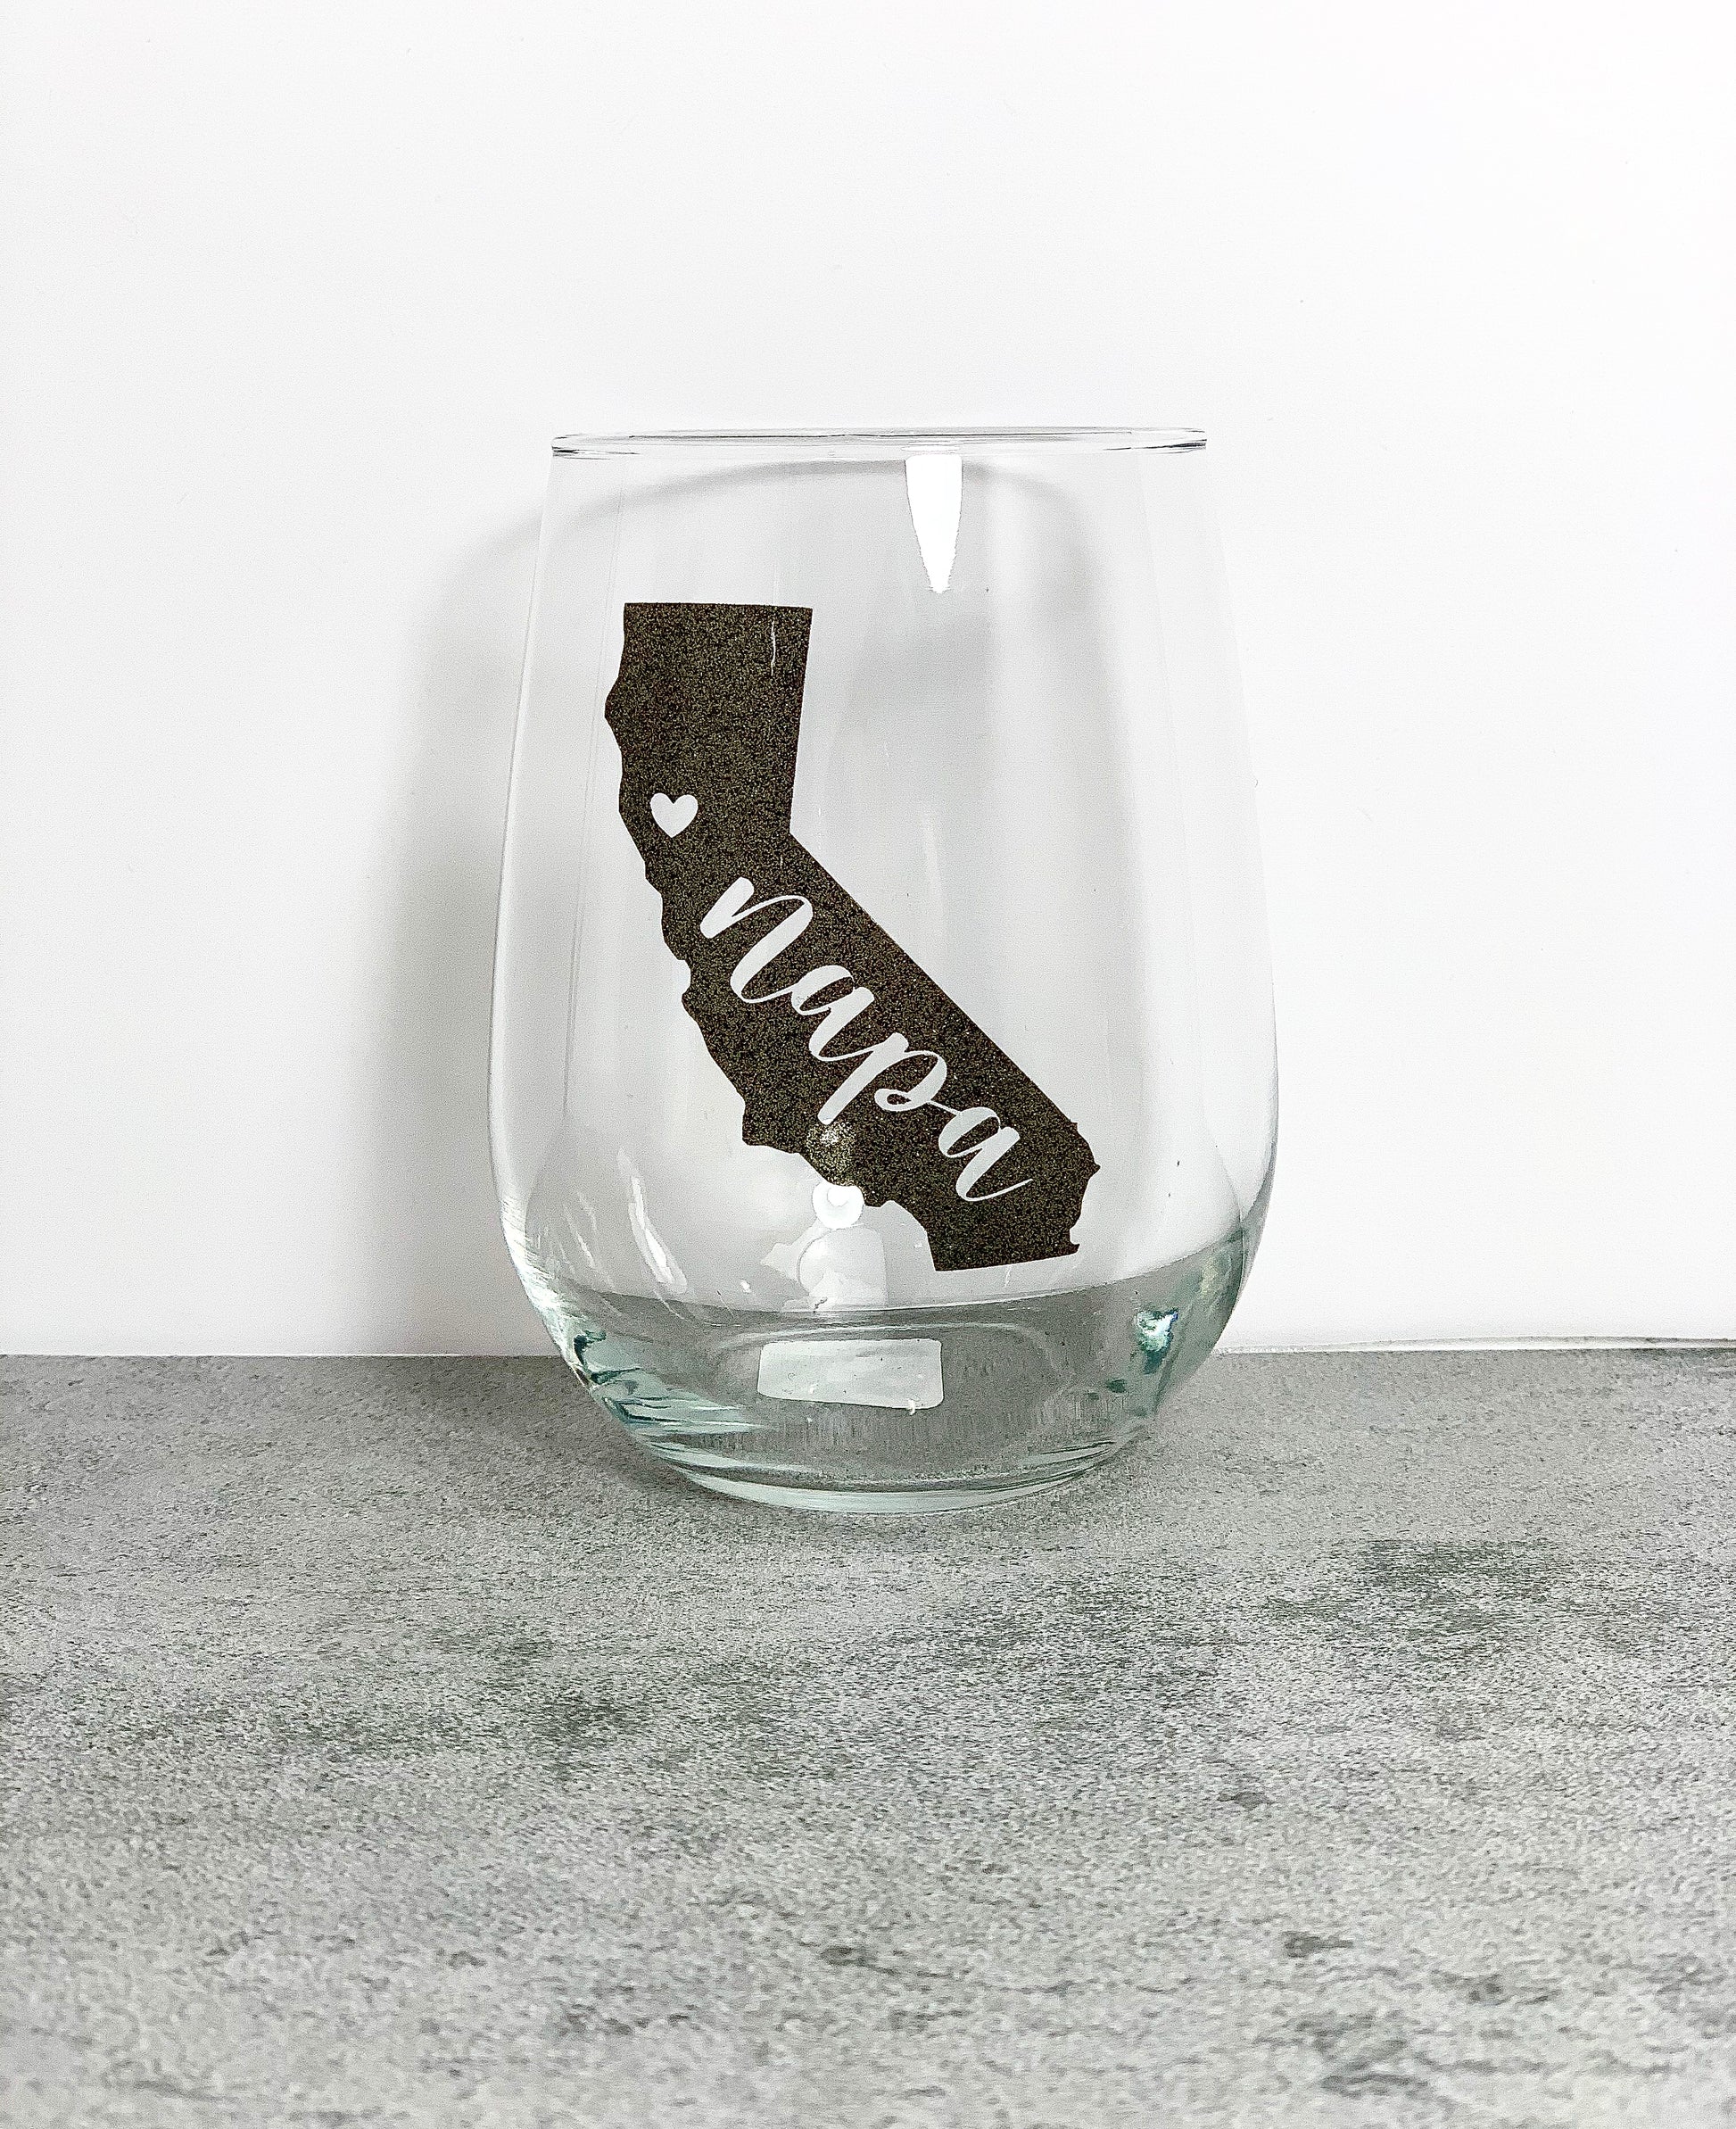 Zip Code/Area Code Engraved Stemless Wine Glass (each)